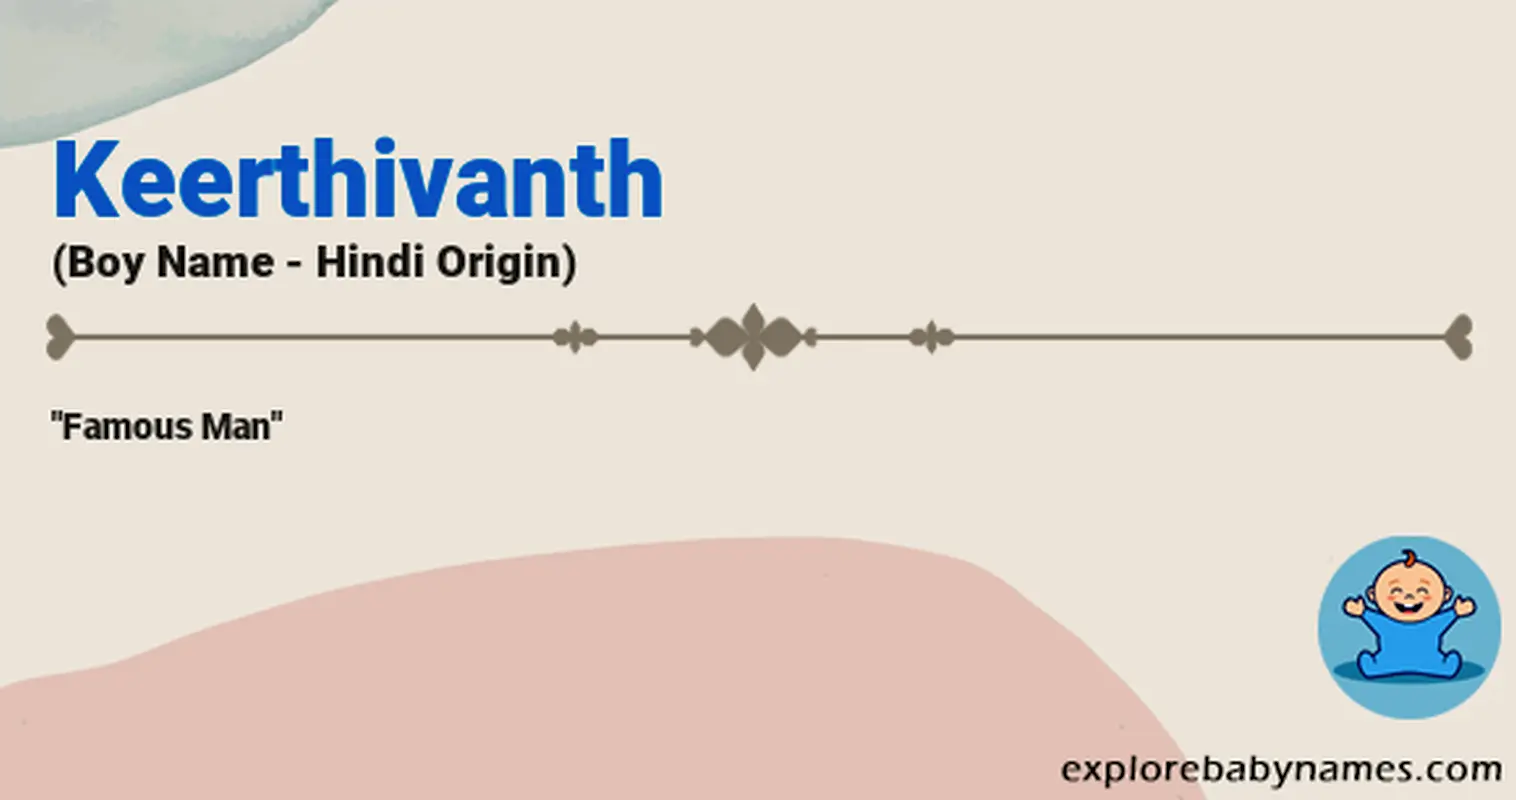 Meaning of Keerthivanth